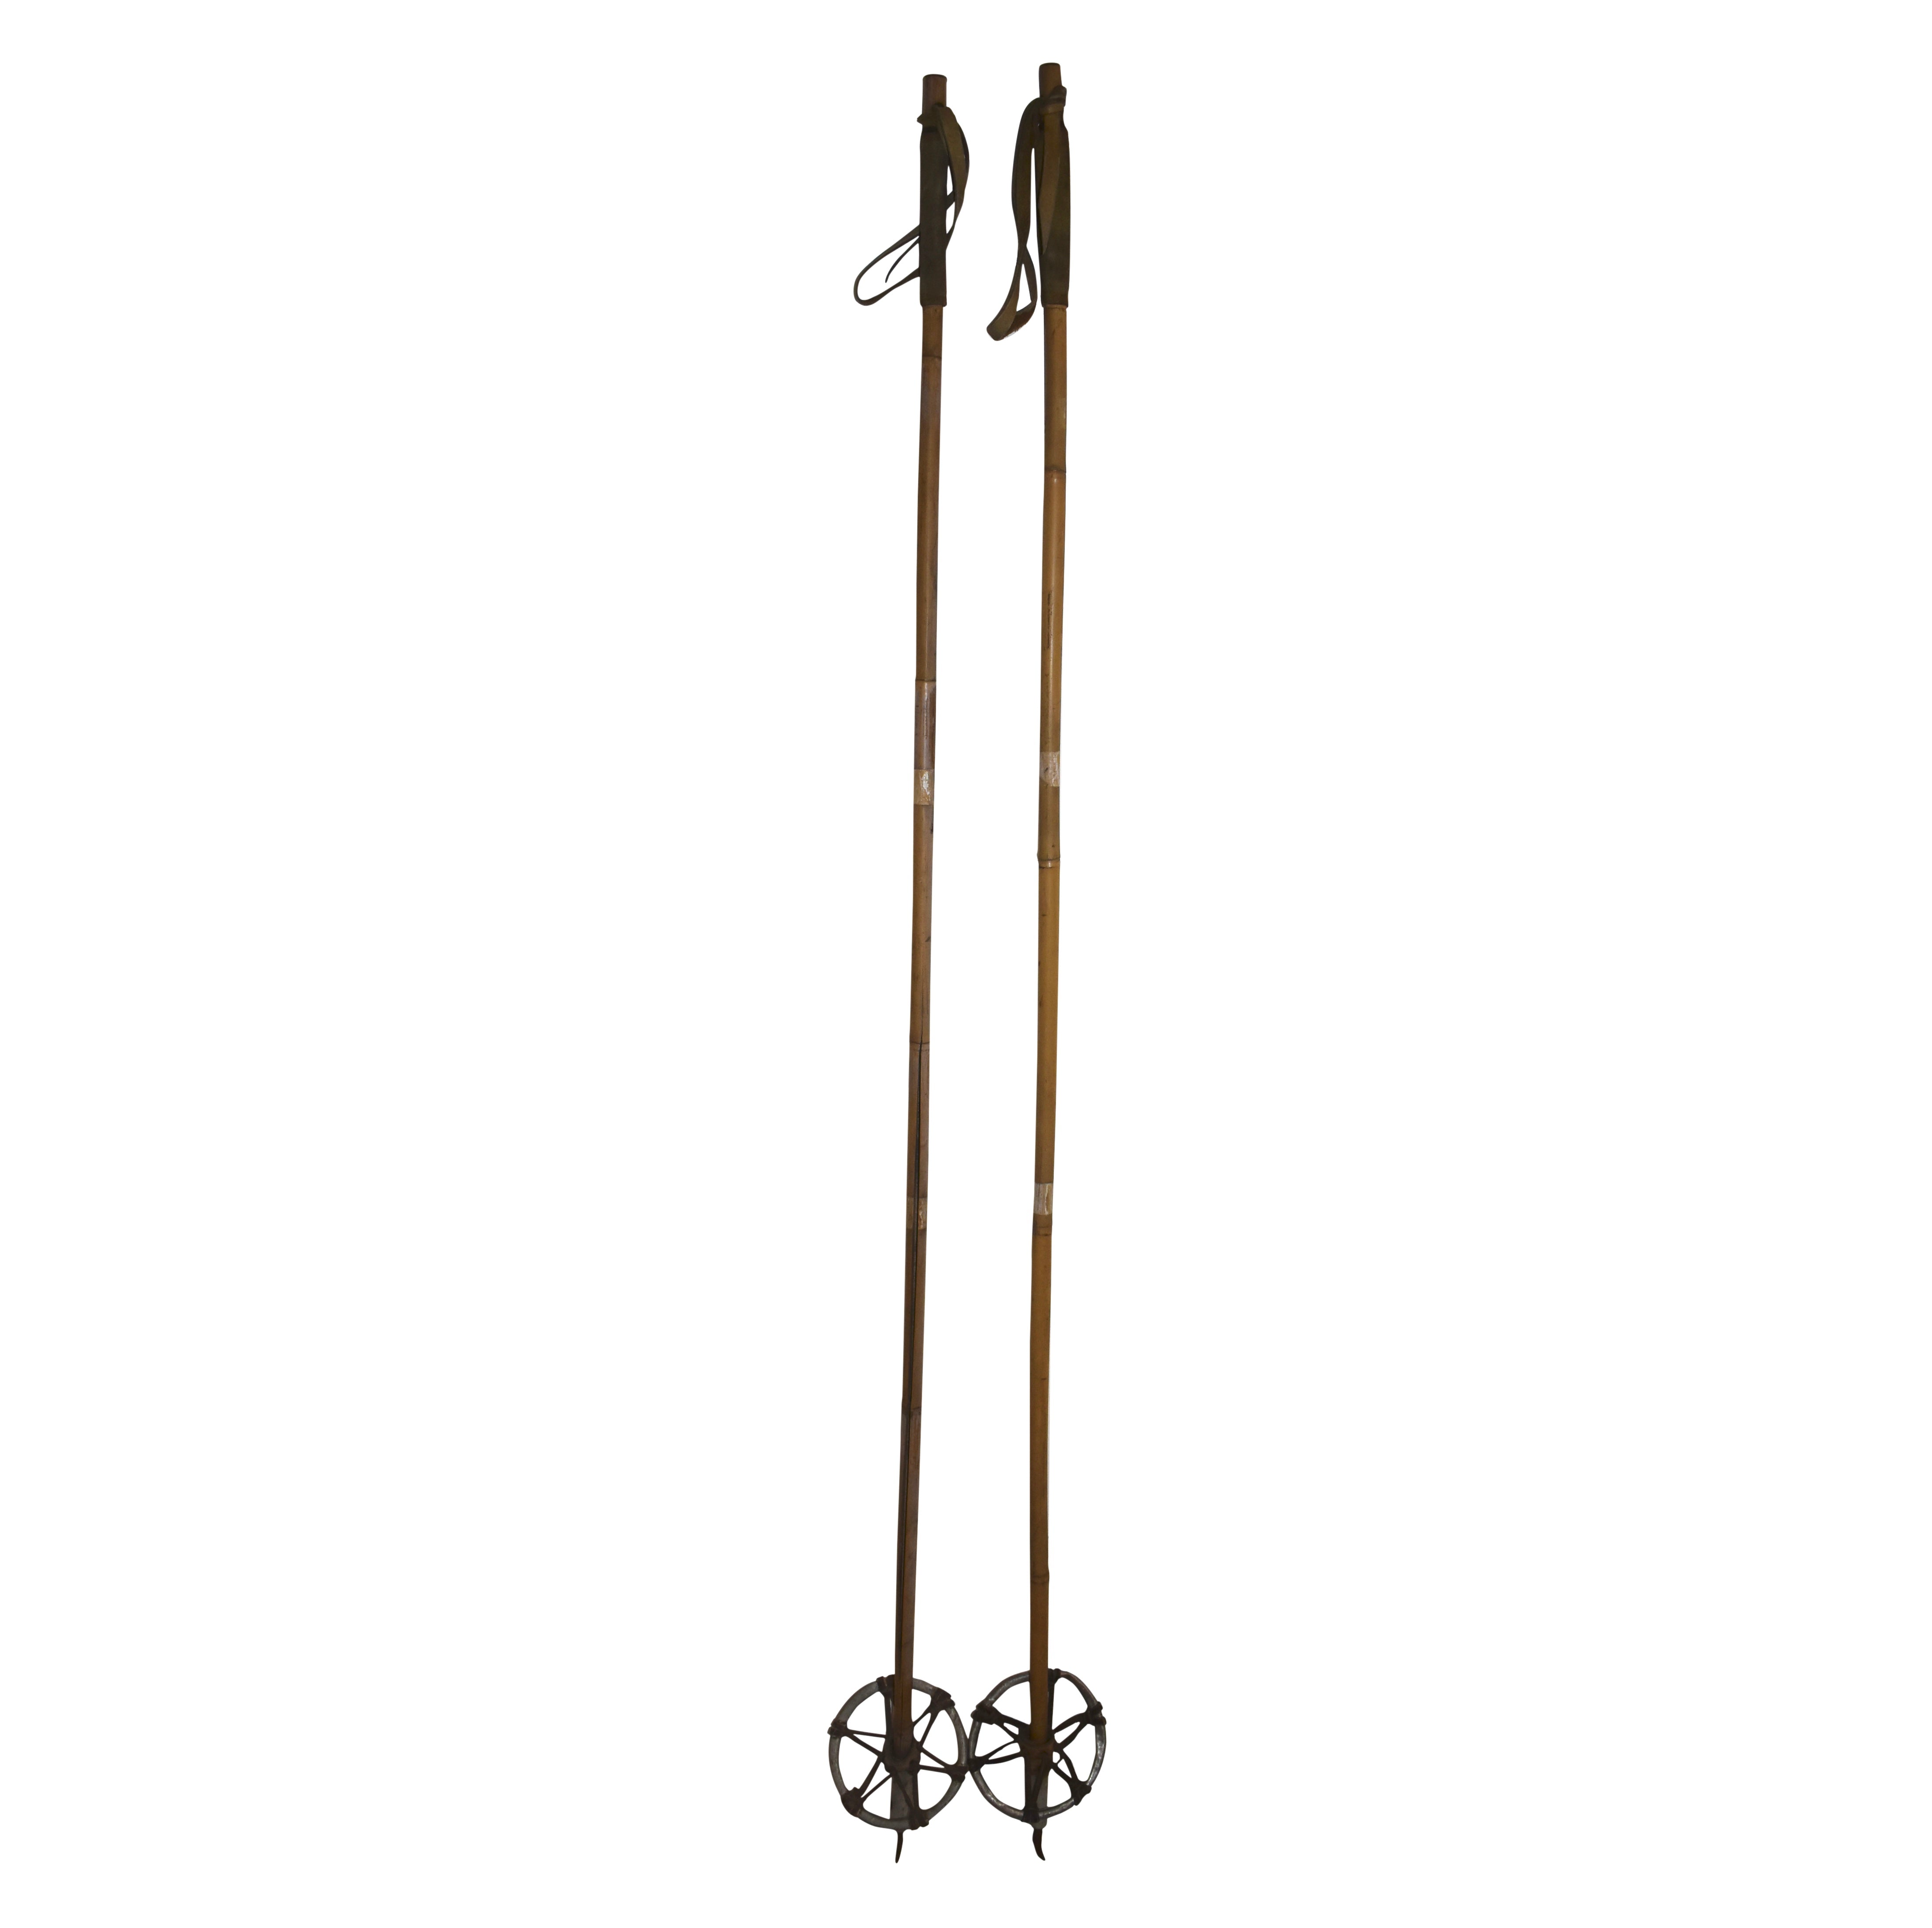 Long Bamboo Ski Poles with Leather Grips